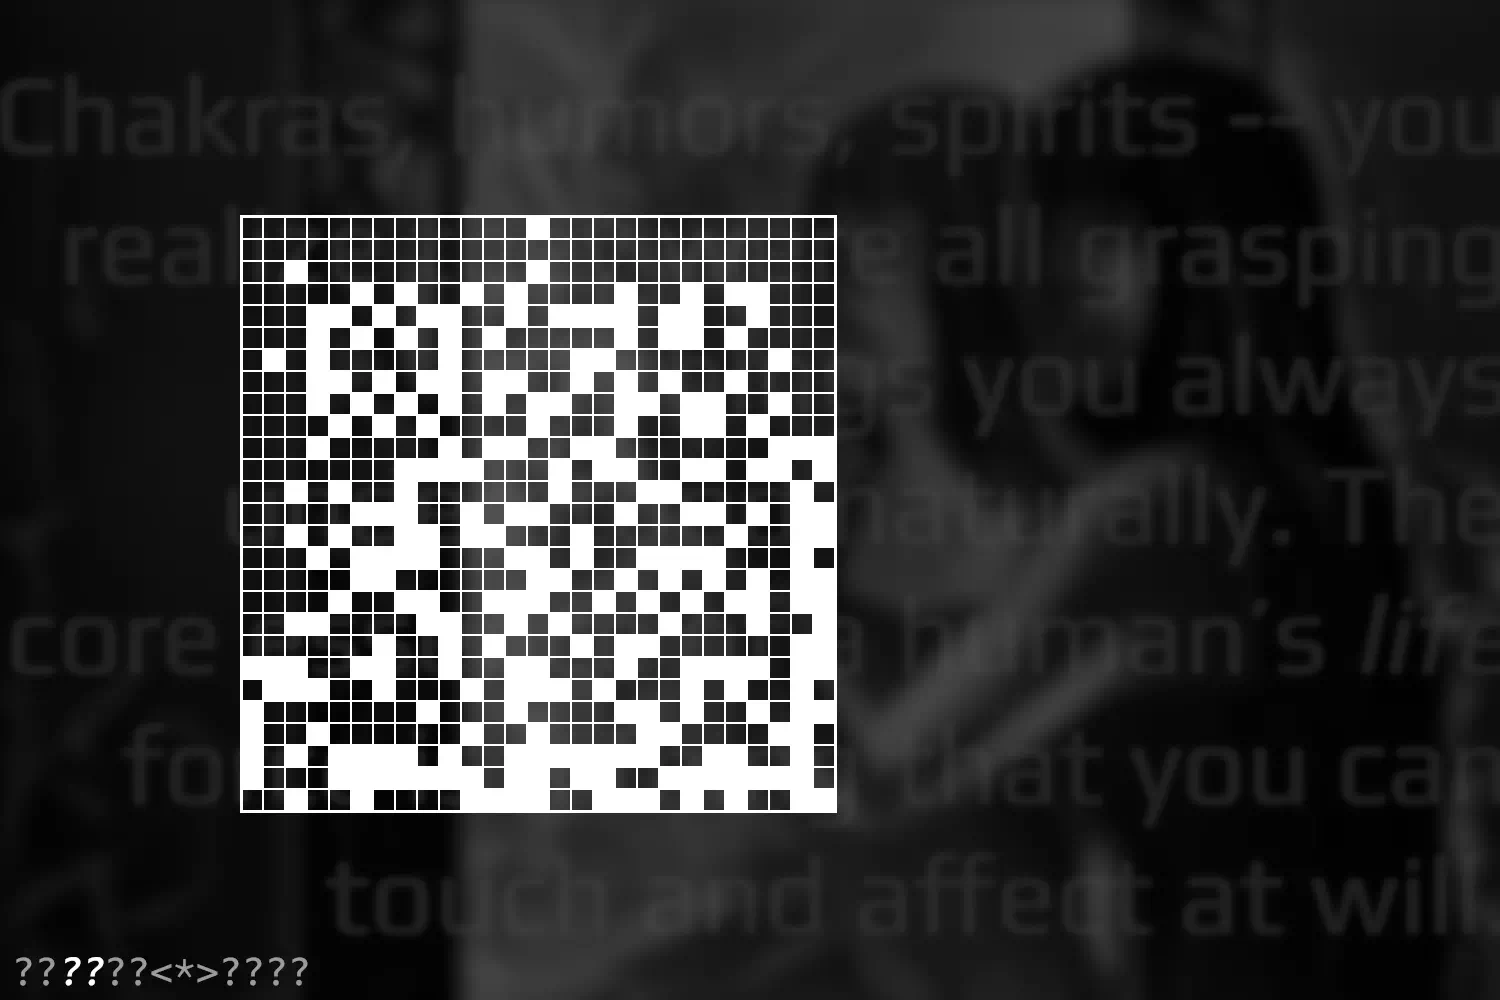 humanist ingress game puzzle some QR code like image